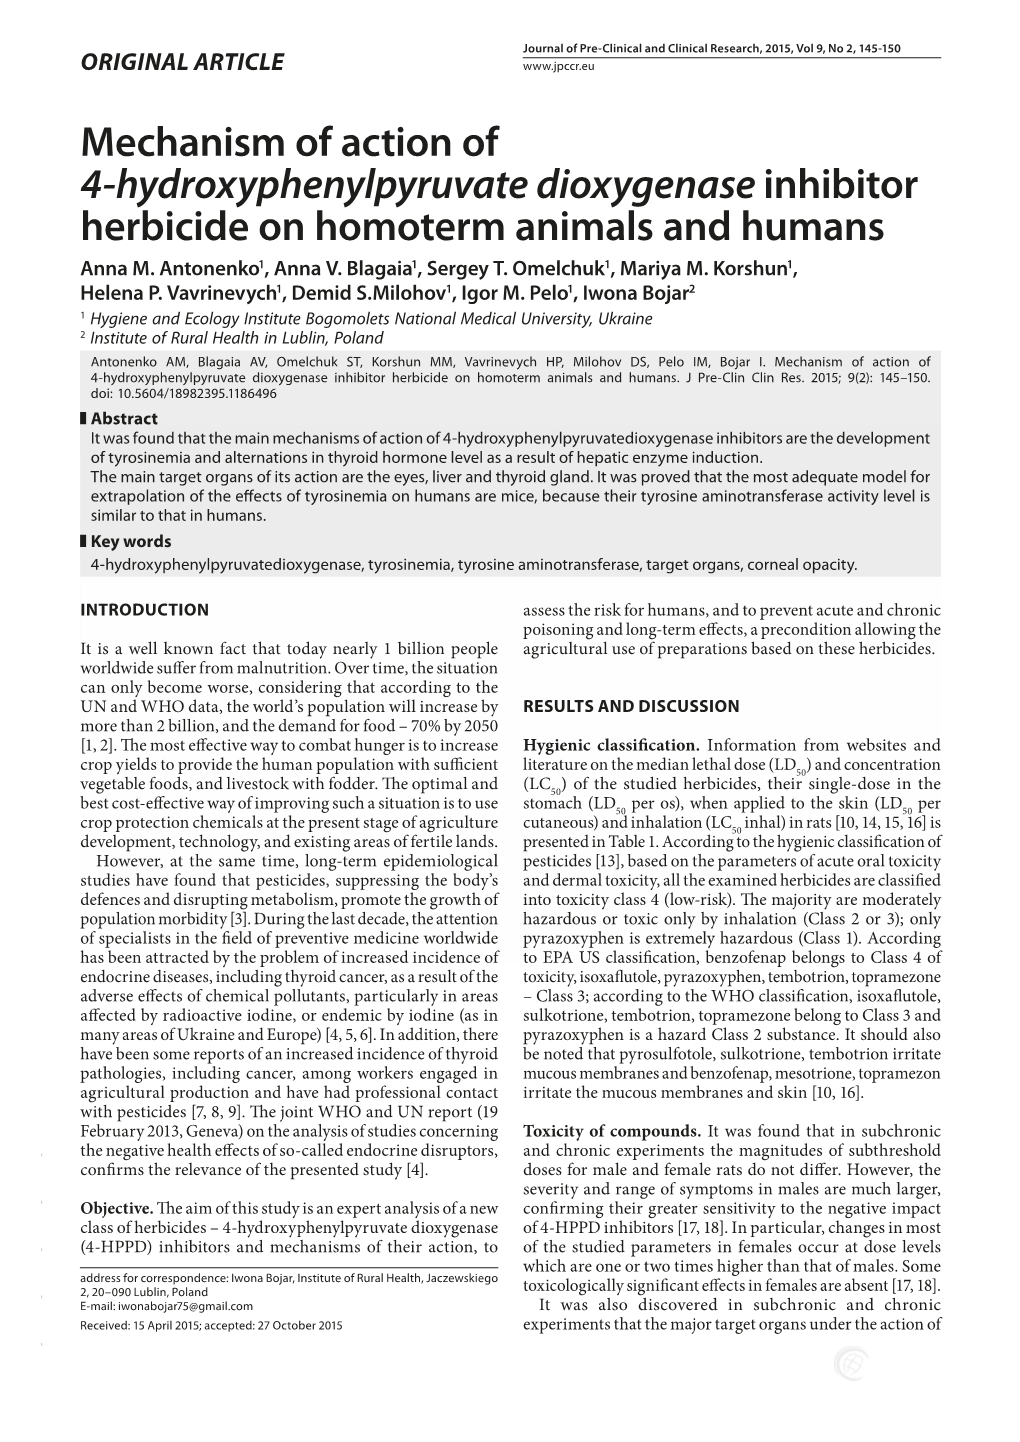 Mechanism of Action of 4-Hydroxyphenylpyruvate Dioxygenase Inhibitor Herbicide on Homoterm Animals and Humans